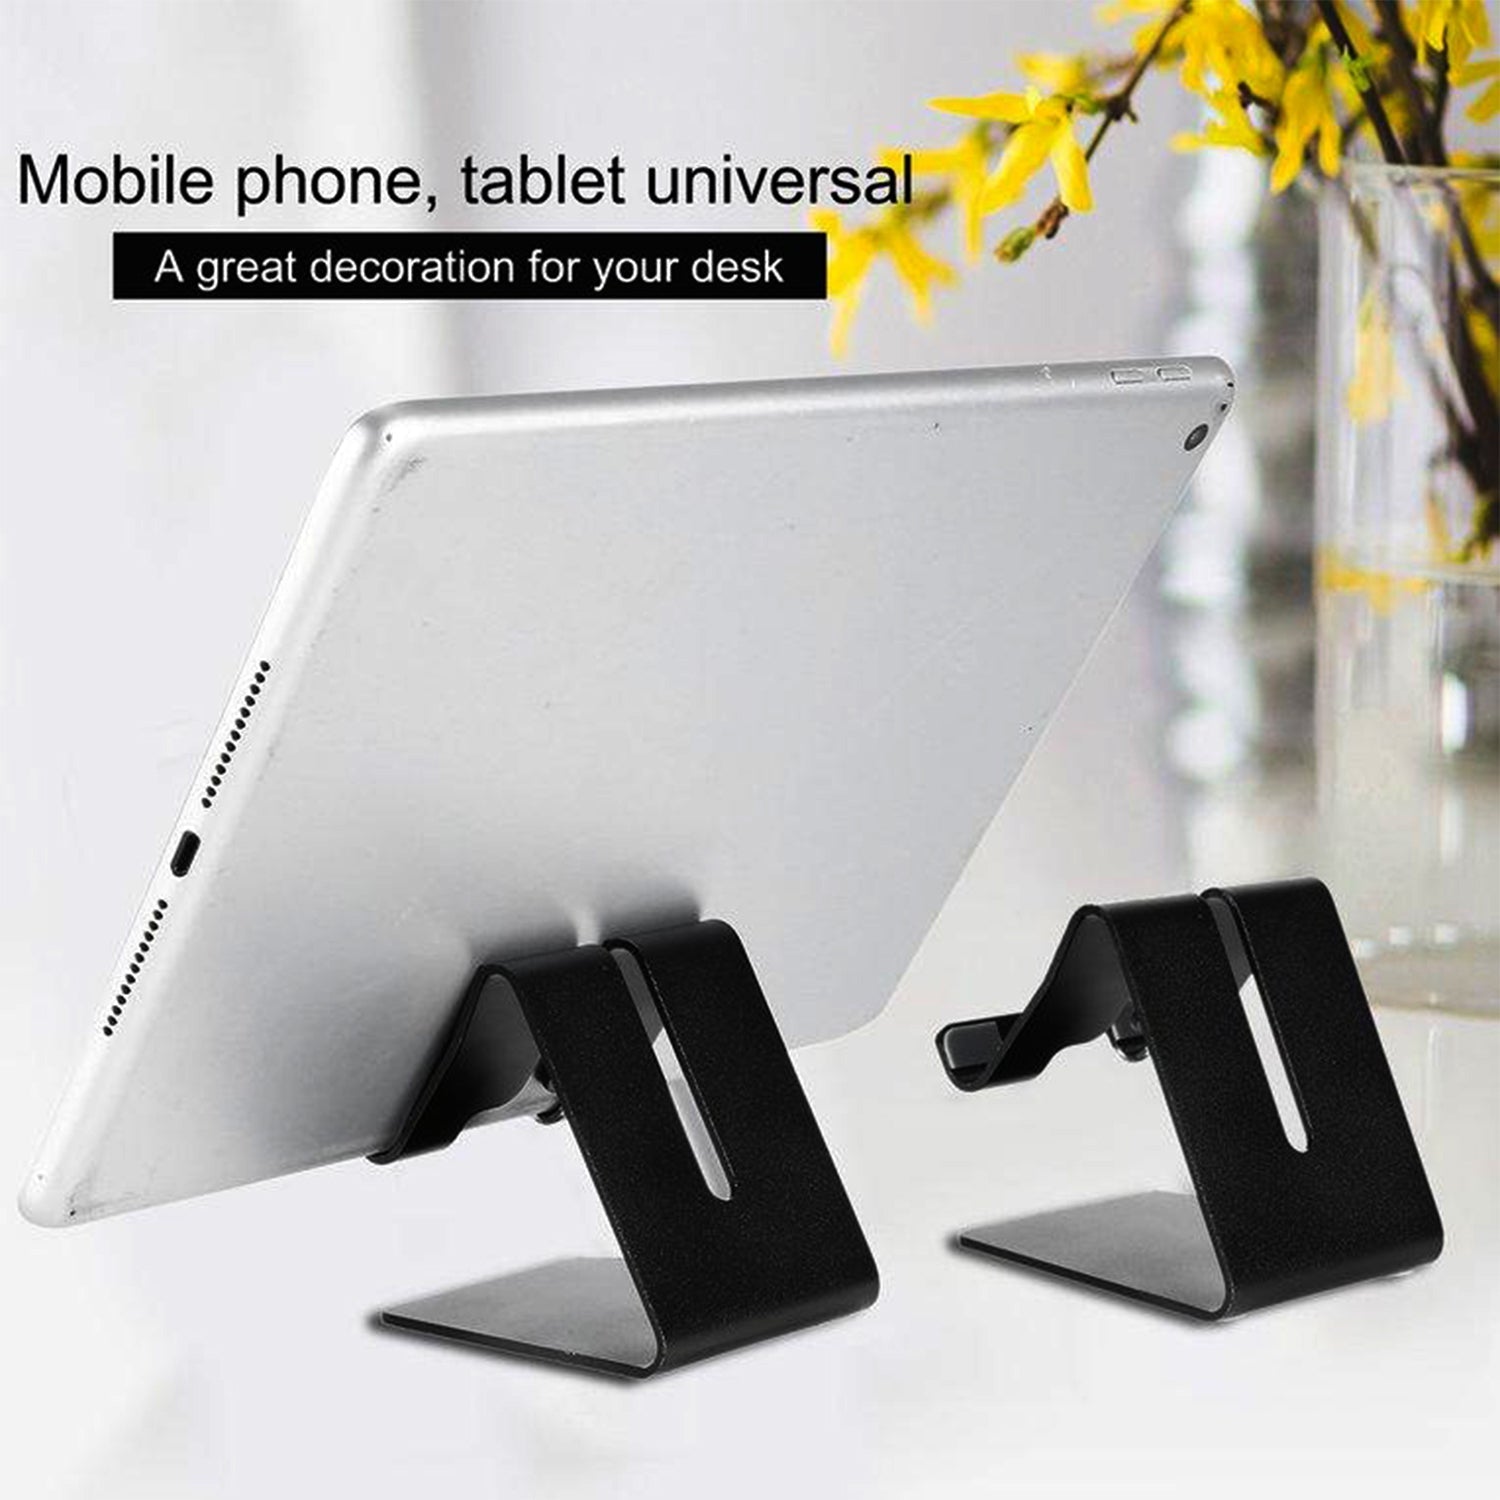 6149 Mobile Metal Stand widely used to give a stand and support for smartphones etc, at any place and any time purposes - DeoDap